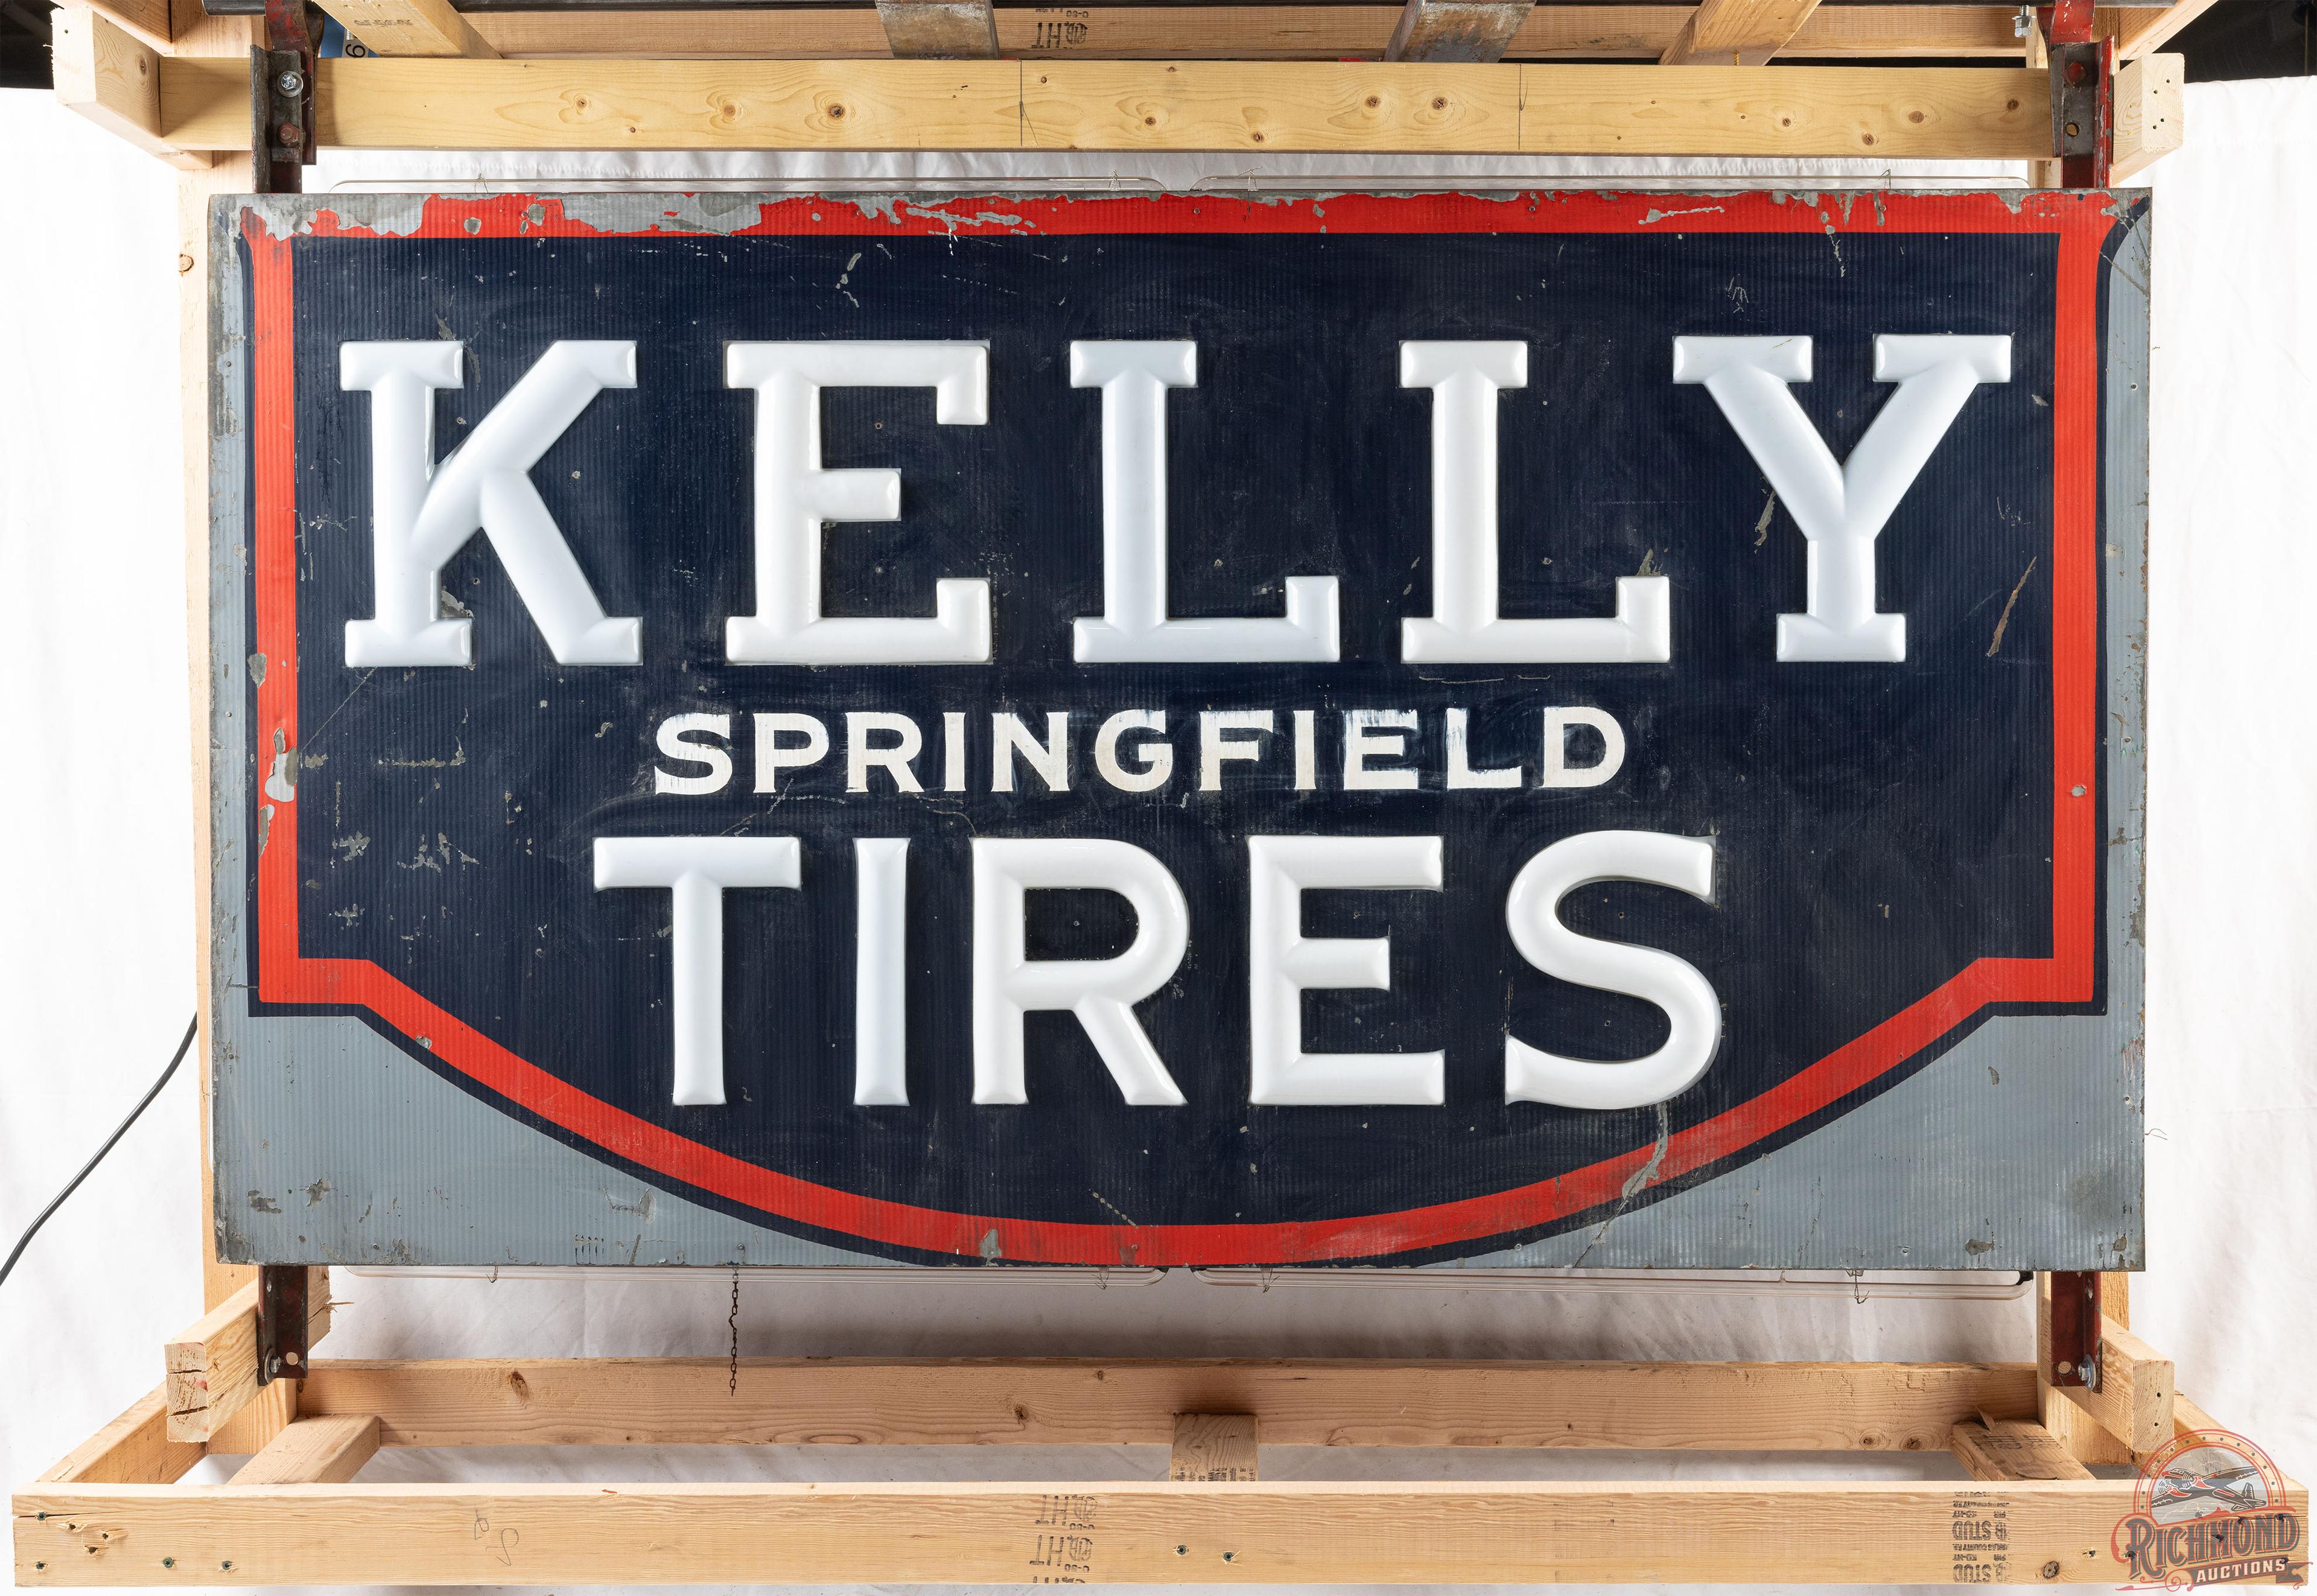 Early Kelly Springfield Tires Double Sided Milk Glass Neon Sign Flexlume